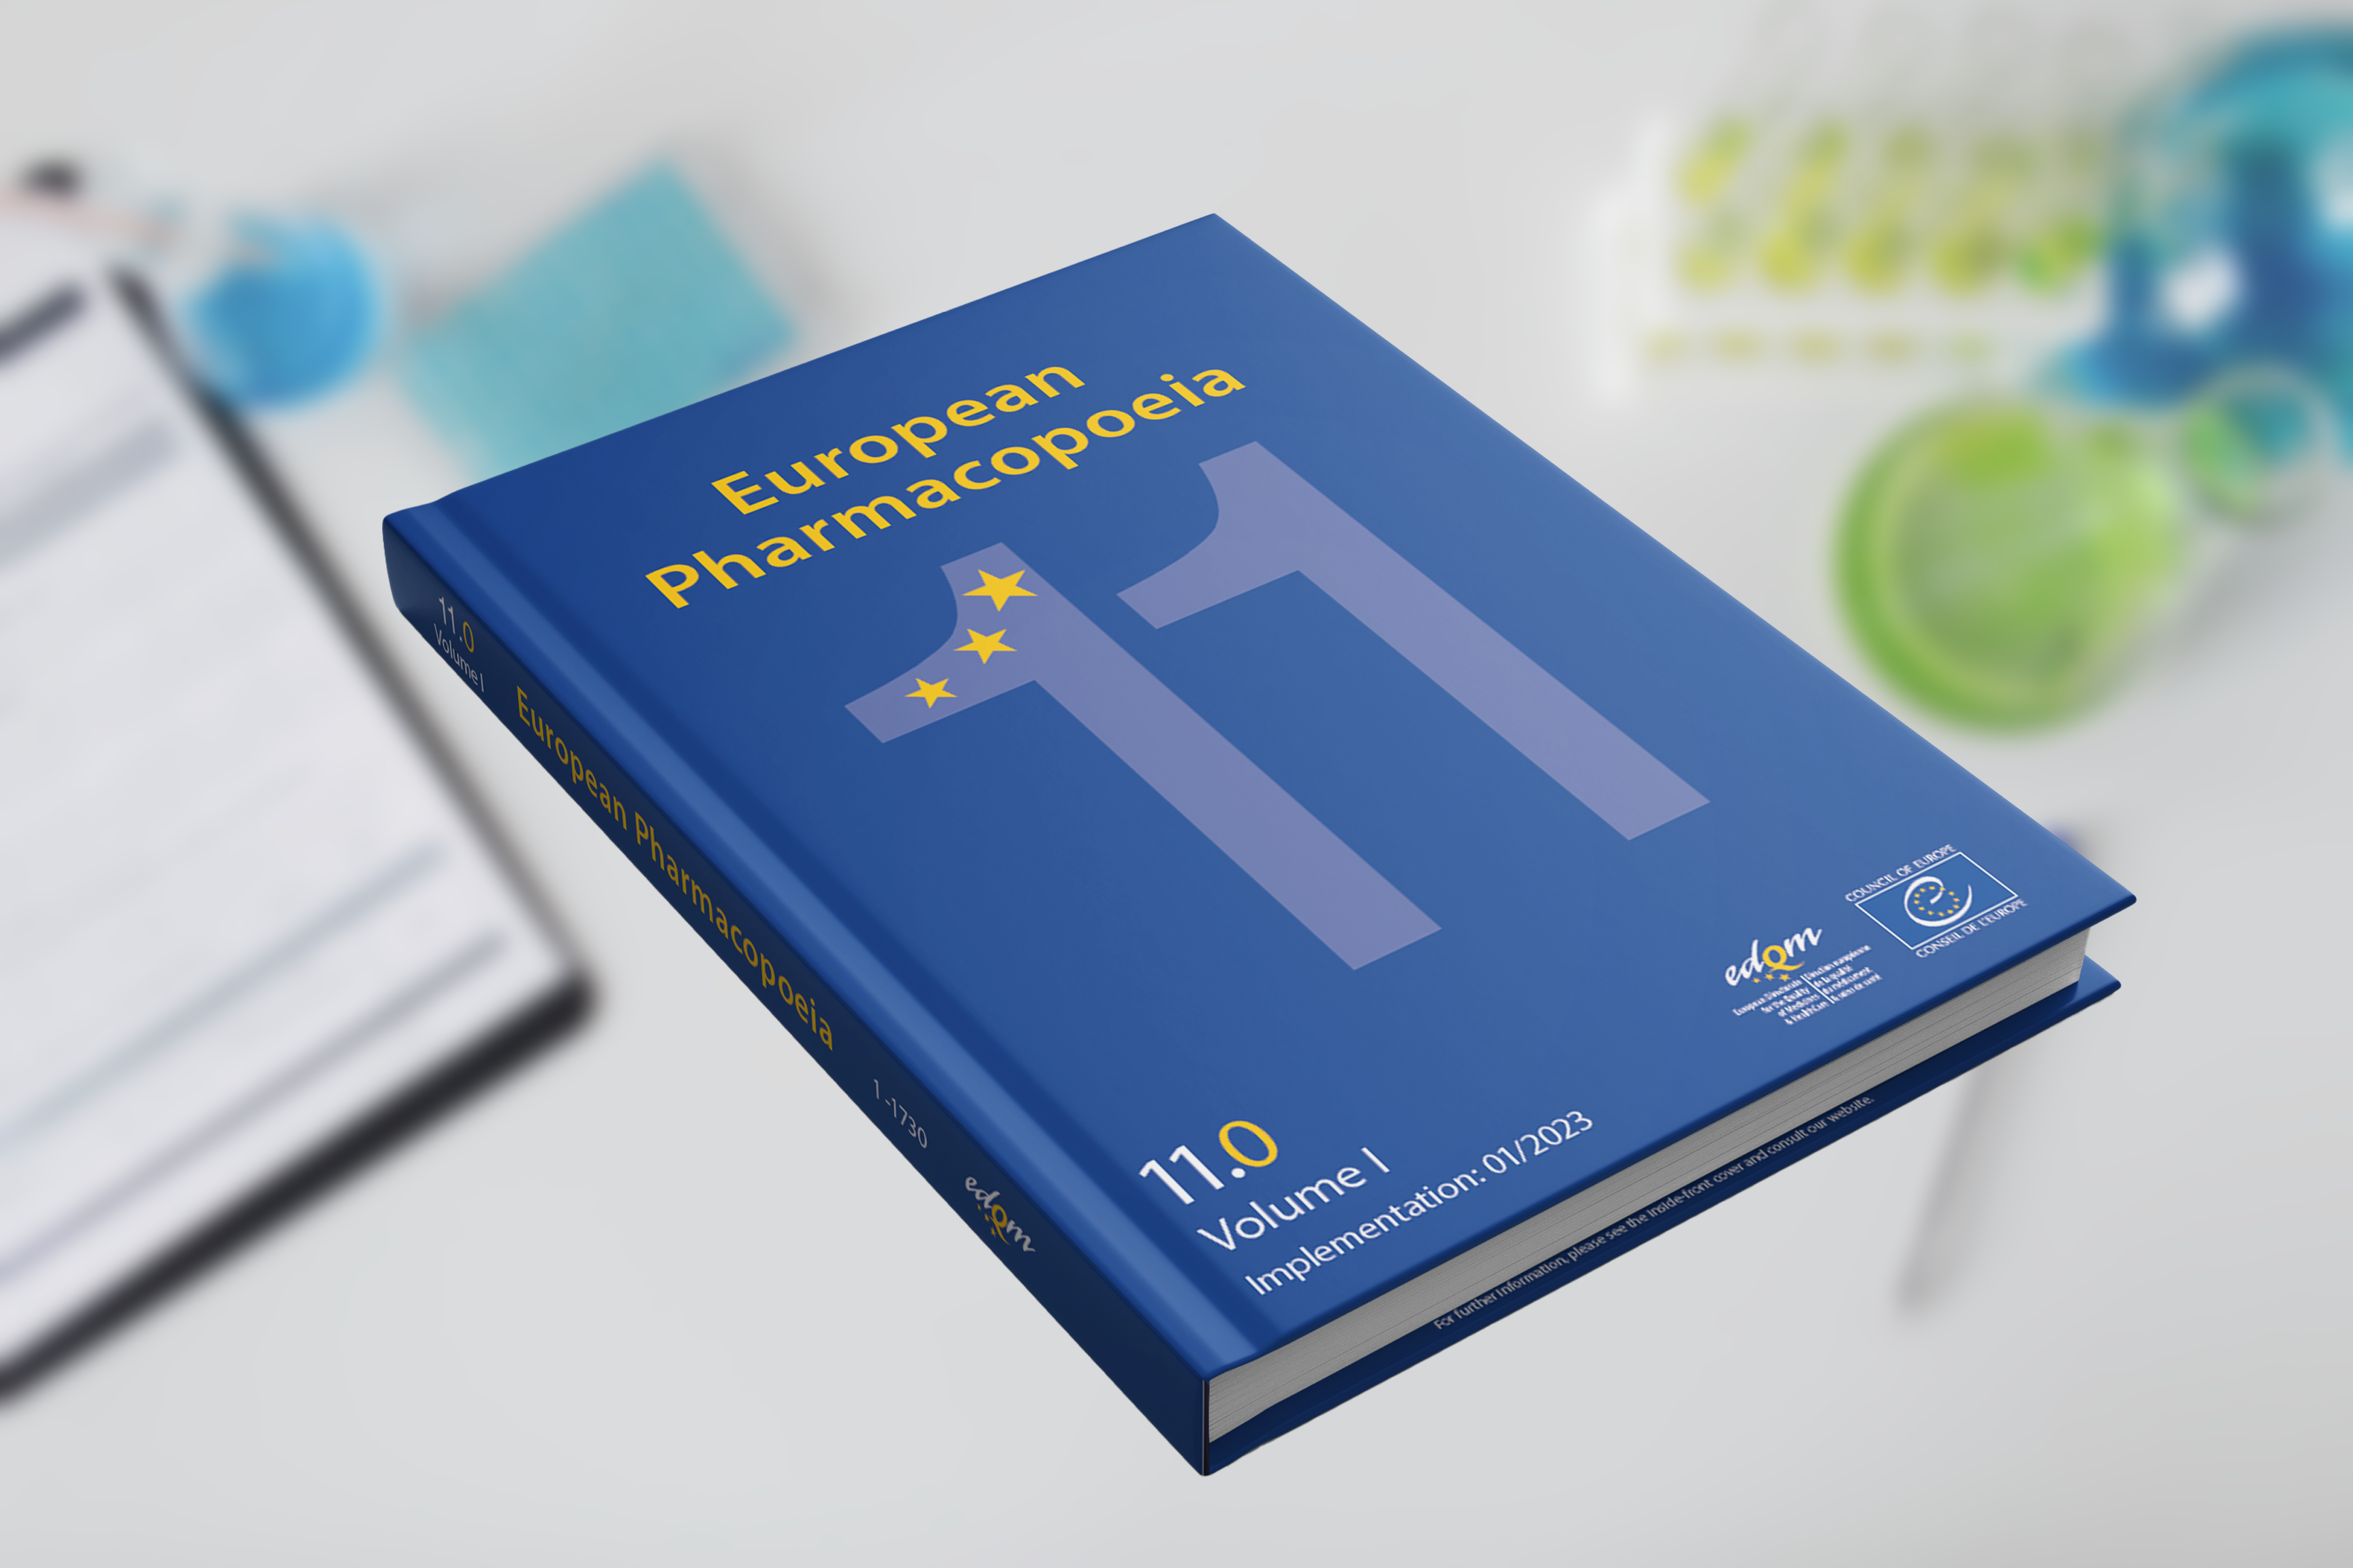 11th edition of the European Pharmacopoeia now available in print